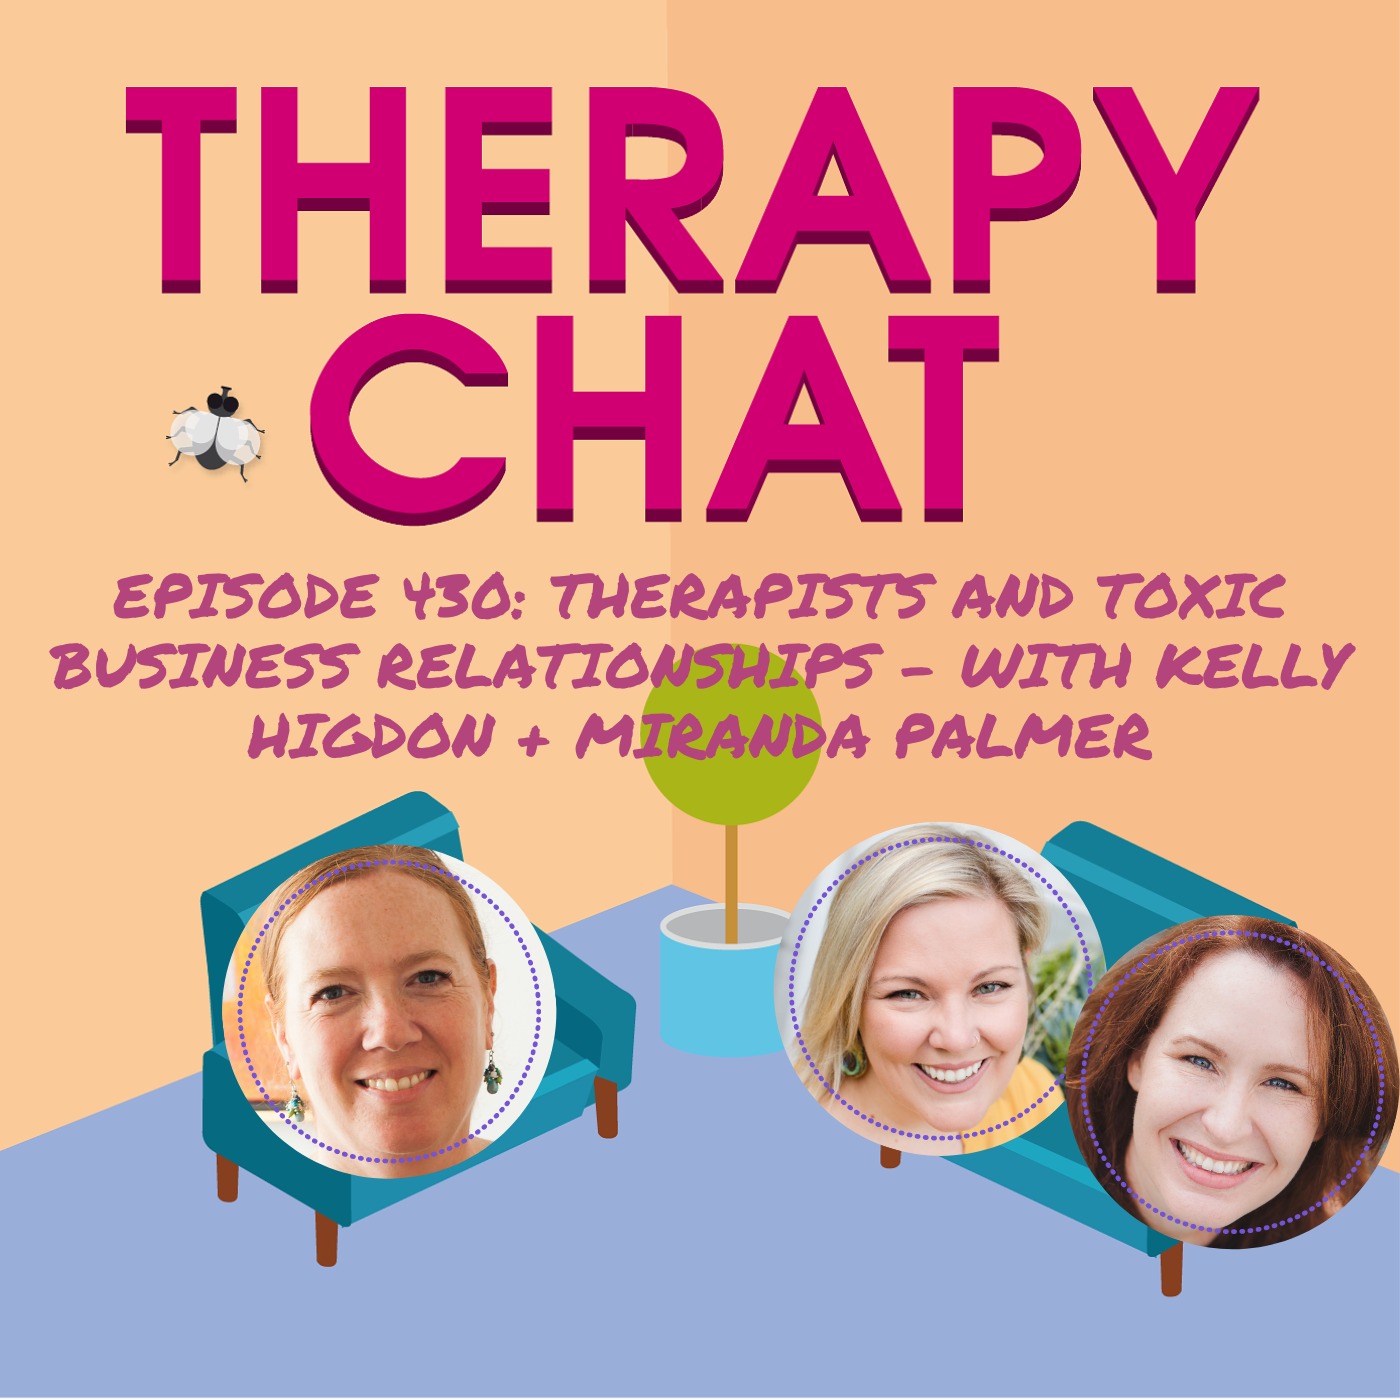 430: Therapists And Toxic Business Relationships - With Kelly Higdon + Miranda Palmer